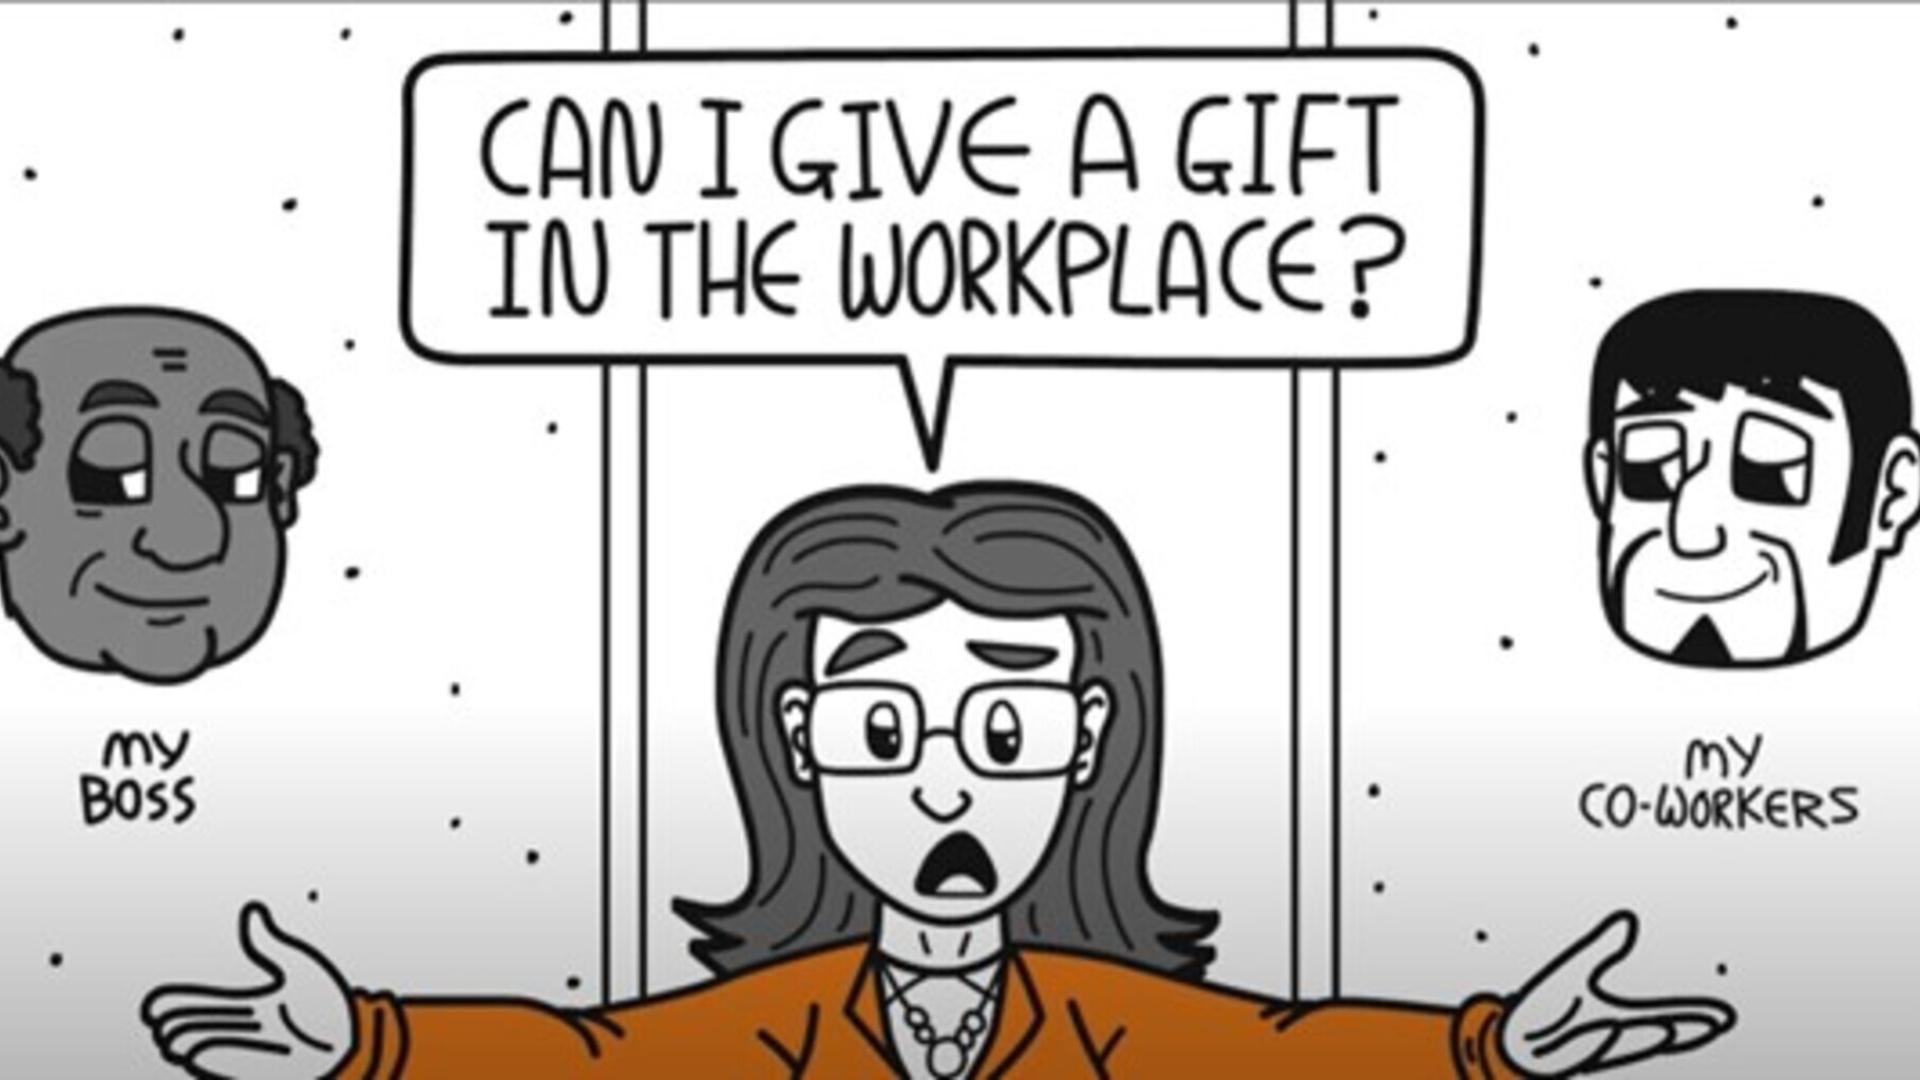 Federal employee asking if she can give gifts in the workplace